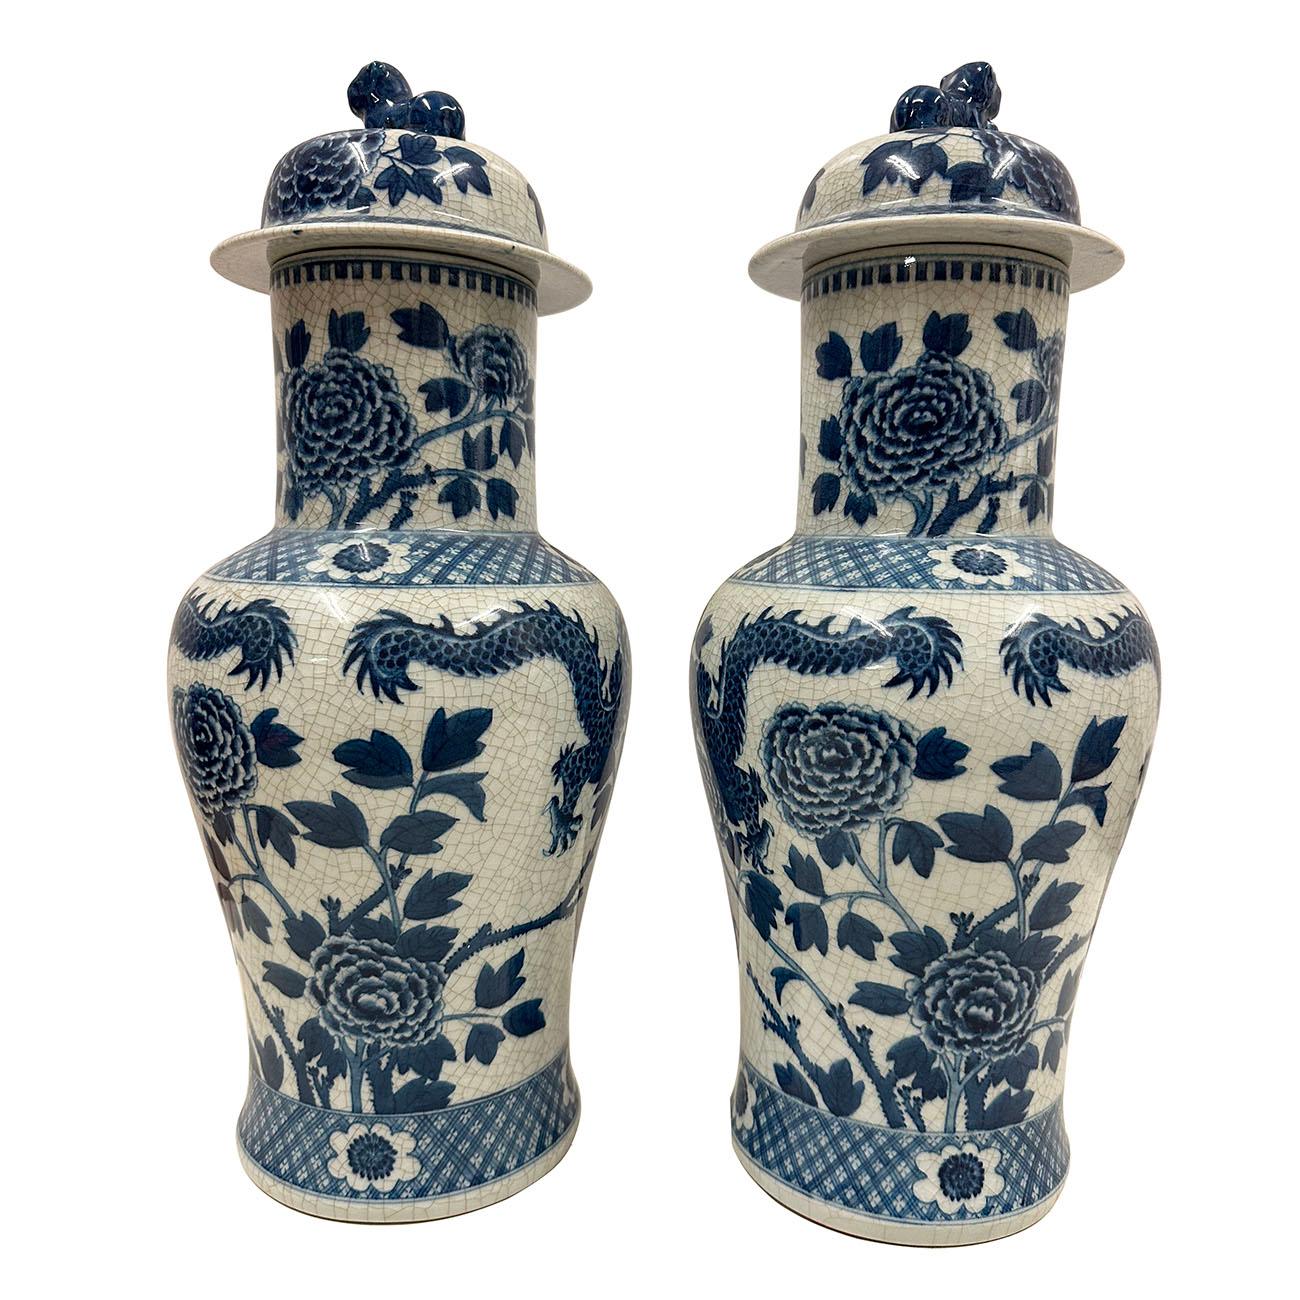 

An exquisite pair of Chinese porcelain lidded vases, in baluster form and beautifully hand-painted with a traditional decoration of Foo Dog and flower on the lid and  Dragon, Floral design on the body. This magnificent Chinese Blue and White